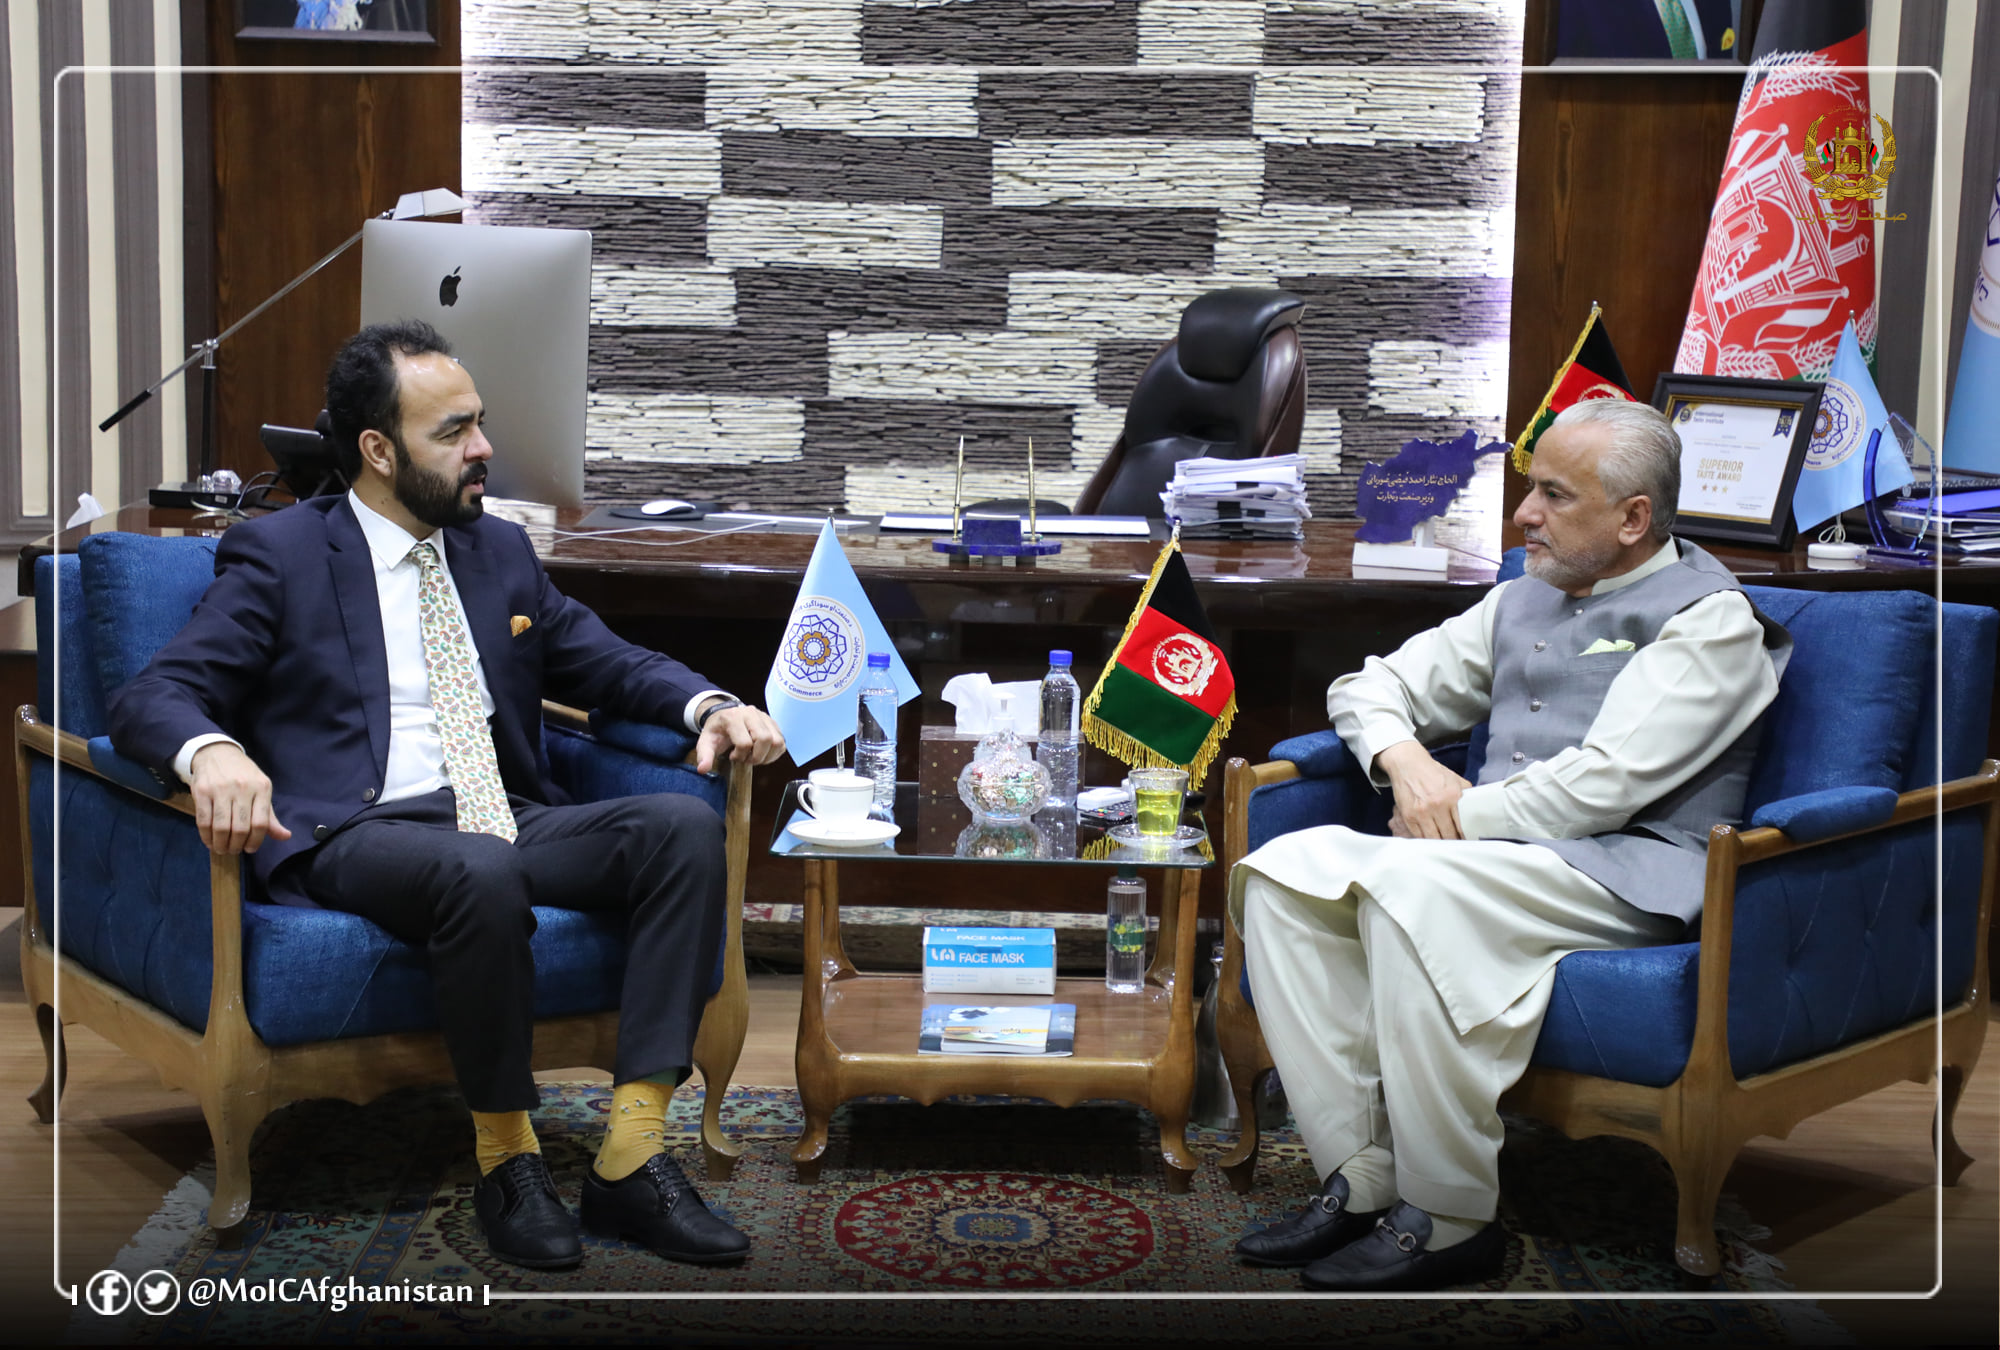 Minister of Industry and Commerce Meets with the Director-General of the Afghanistan National Standards Authority (ANSA)